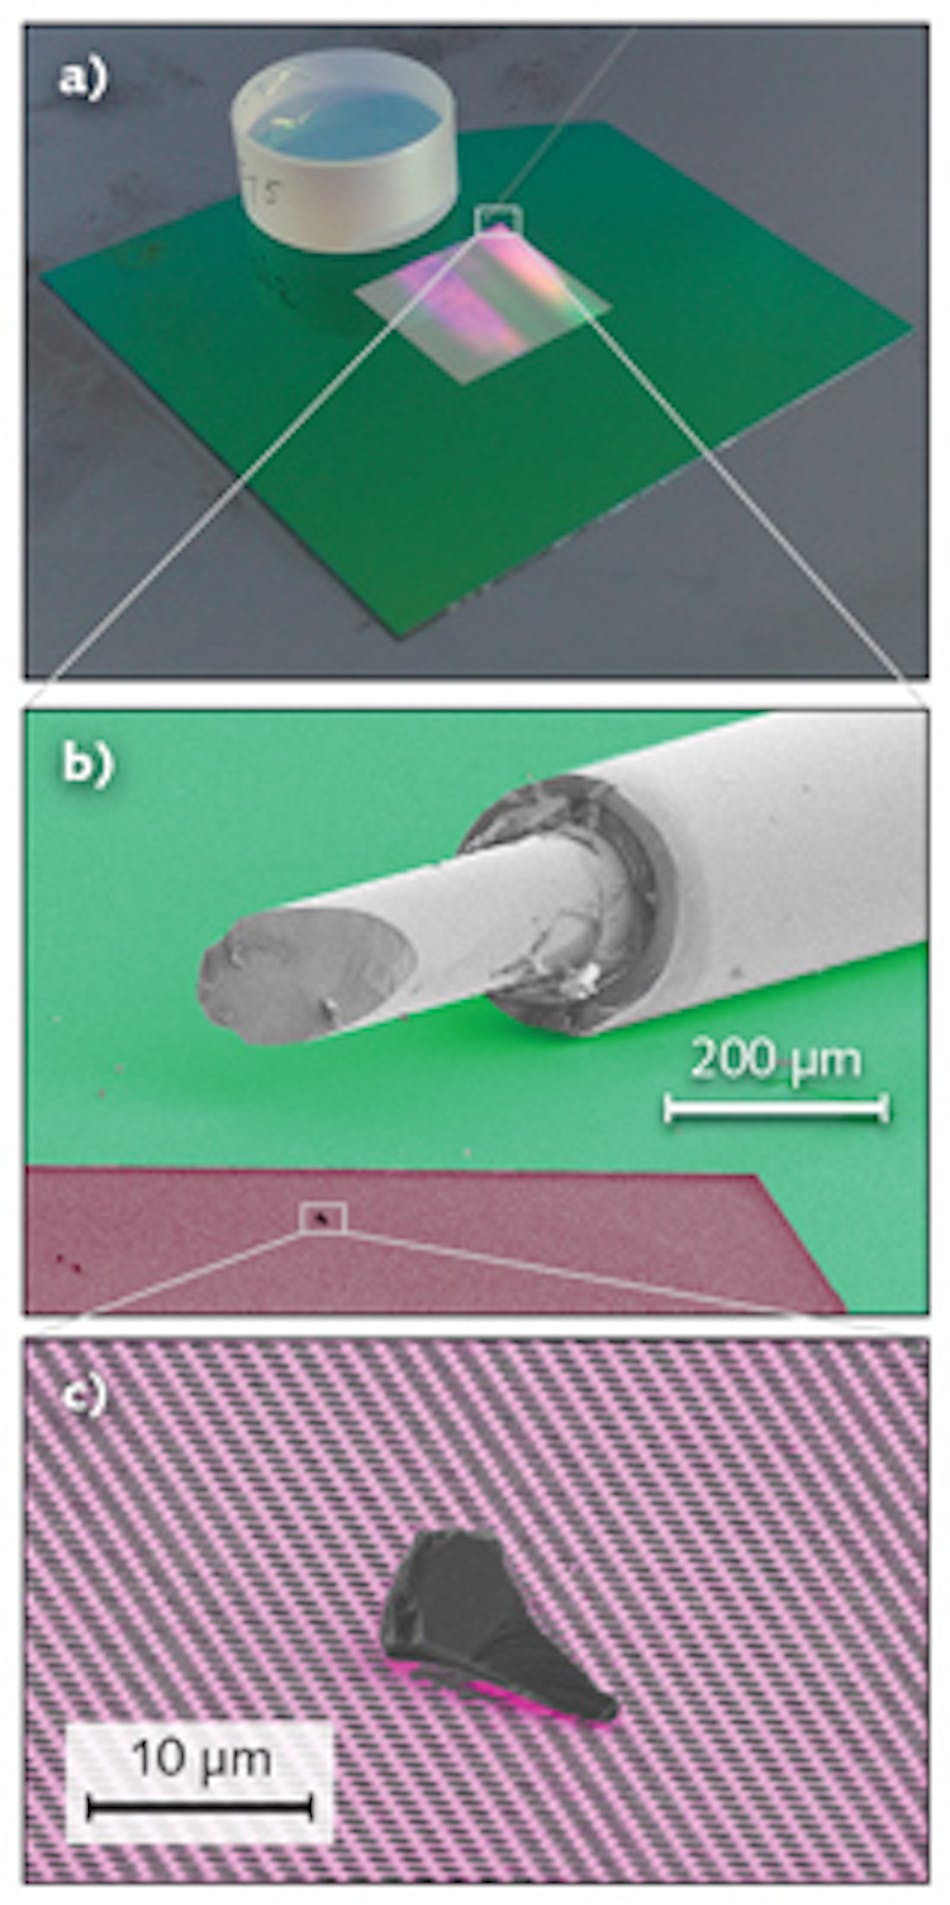 An ultralight photonic-crystal (PhC) reflective membrane has been made at sizes up to 1 cm2 ([a], next to bulk optic, and [b], zoomed in next to an optical fiber); the PhC pattern consists of a square array of holes (c).